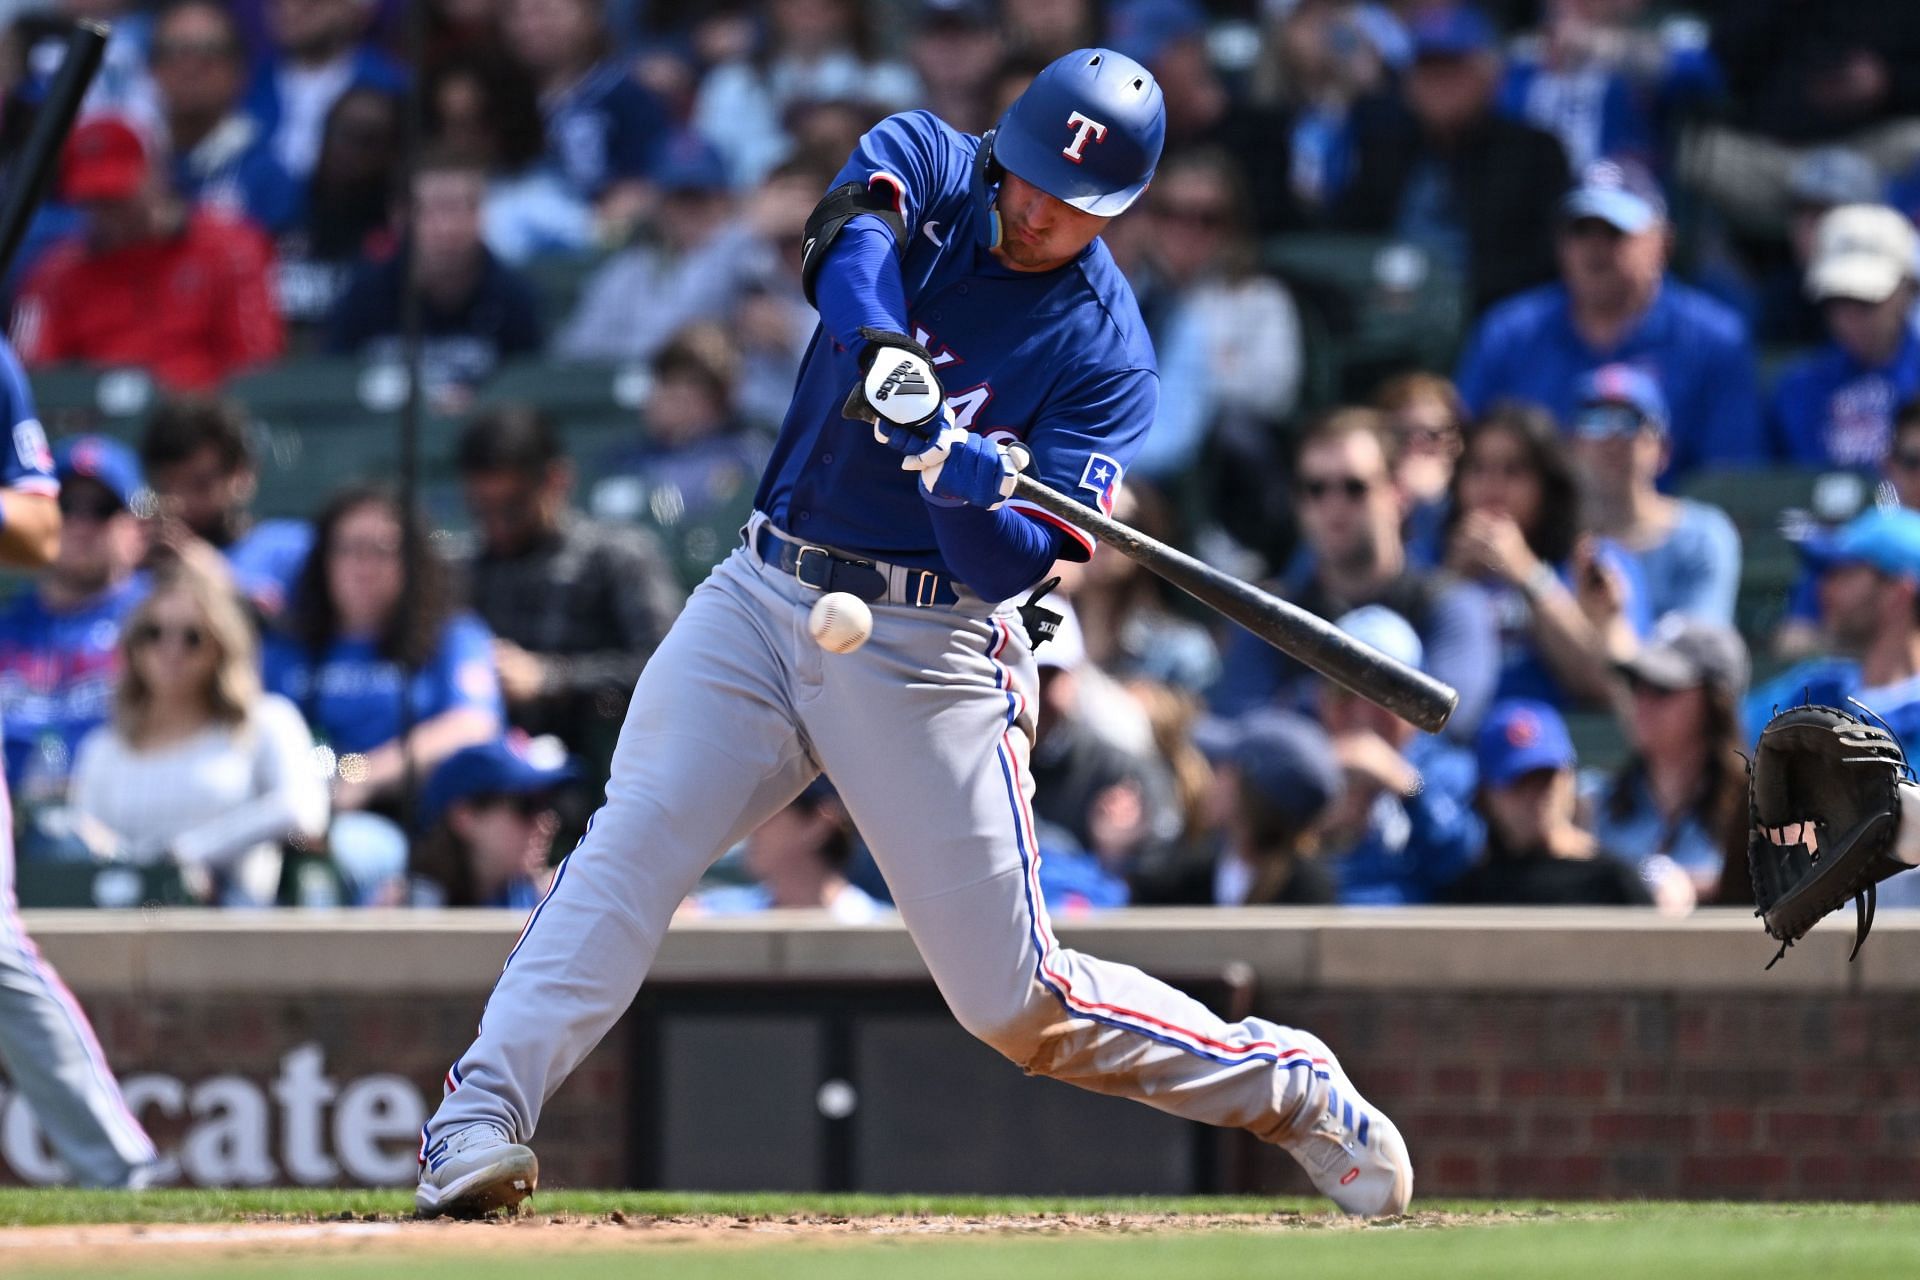 Corey Seager of the Texas Rangers hits an RBI double.